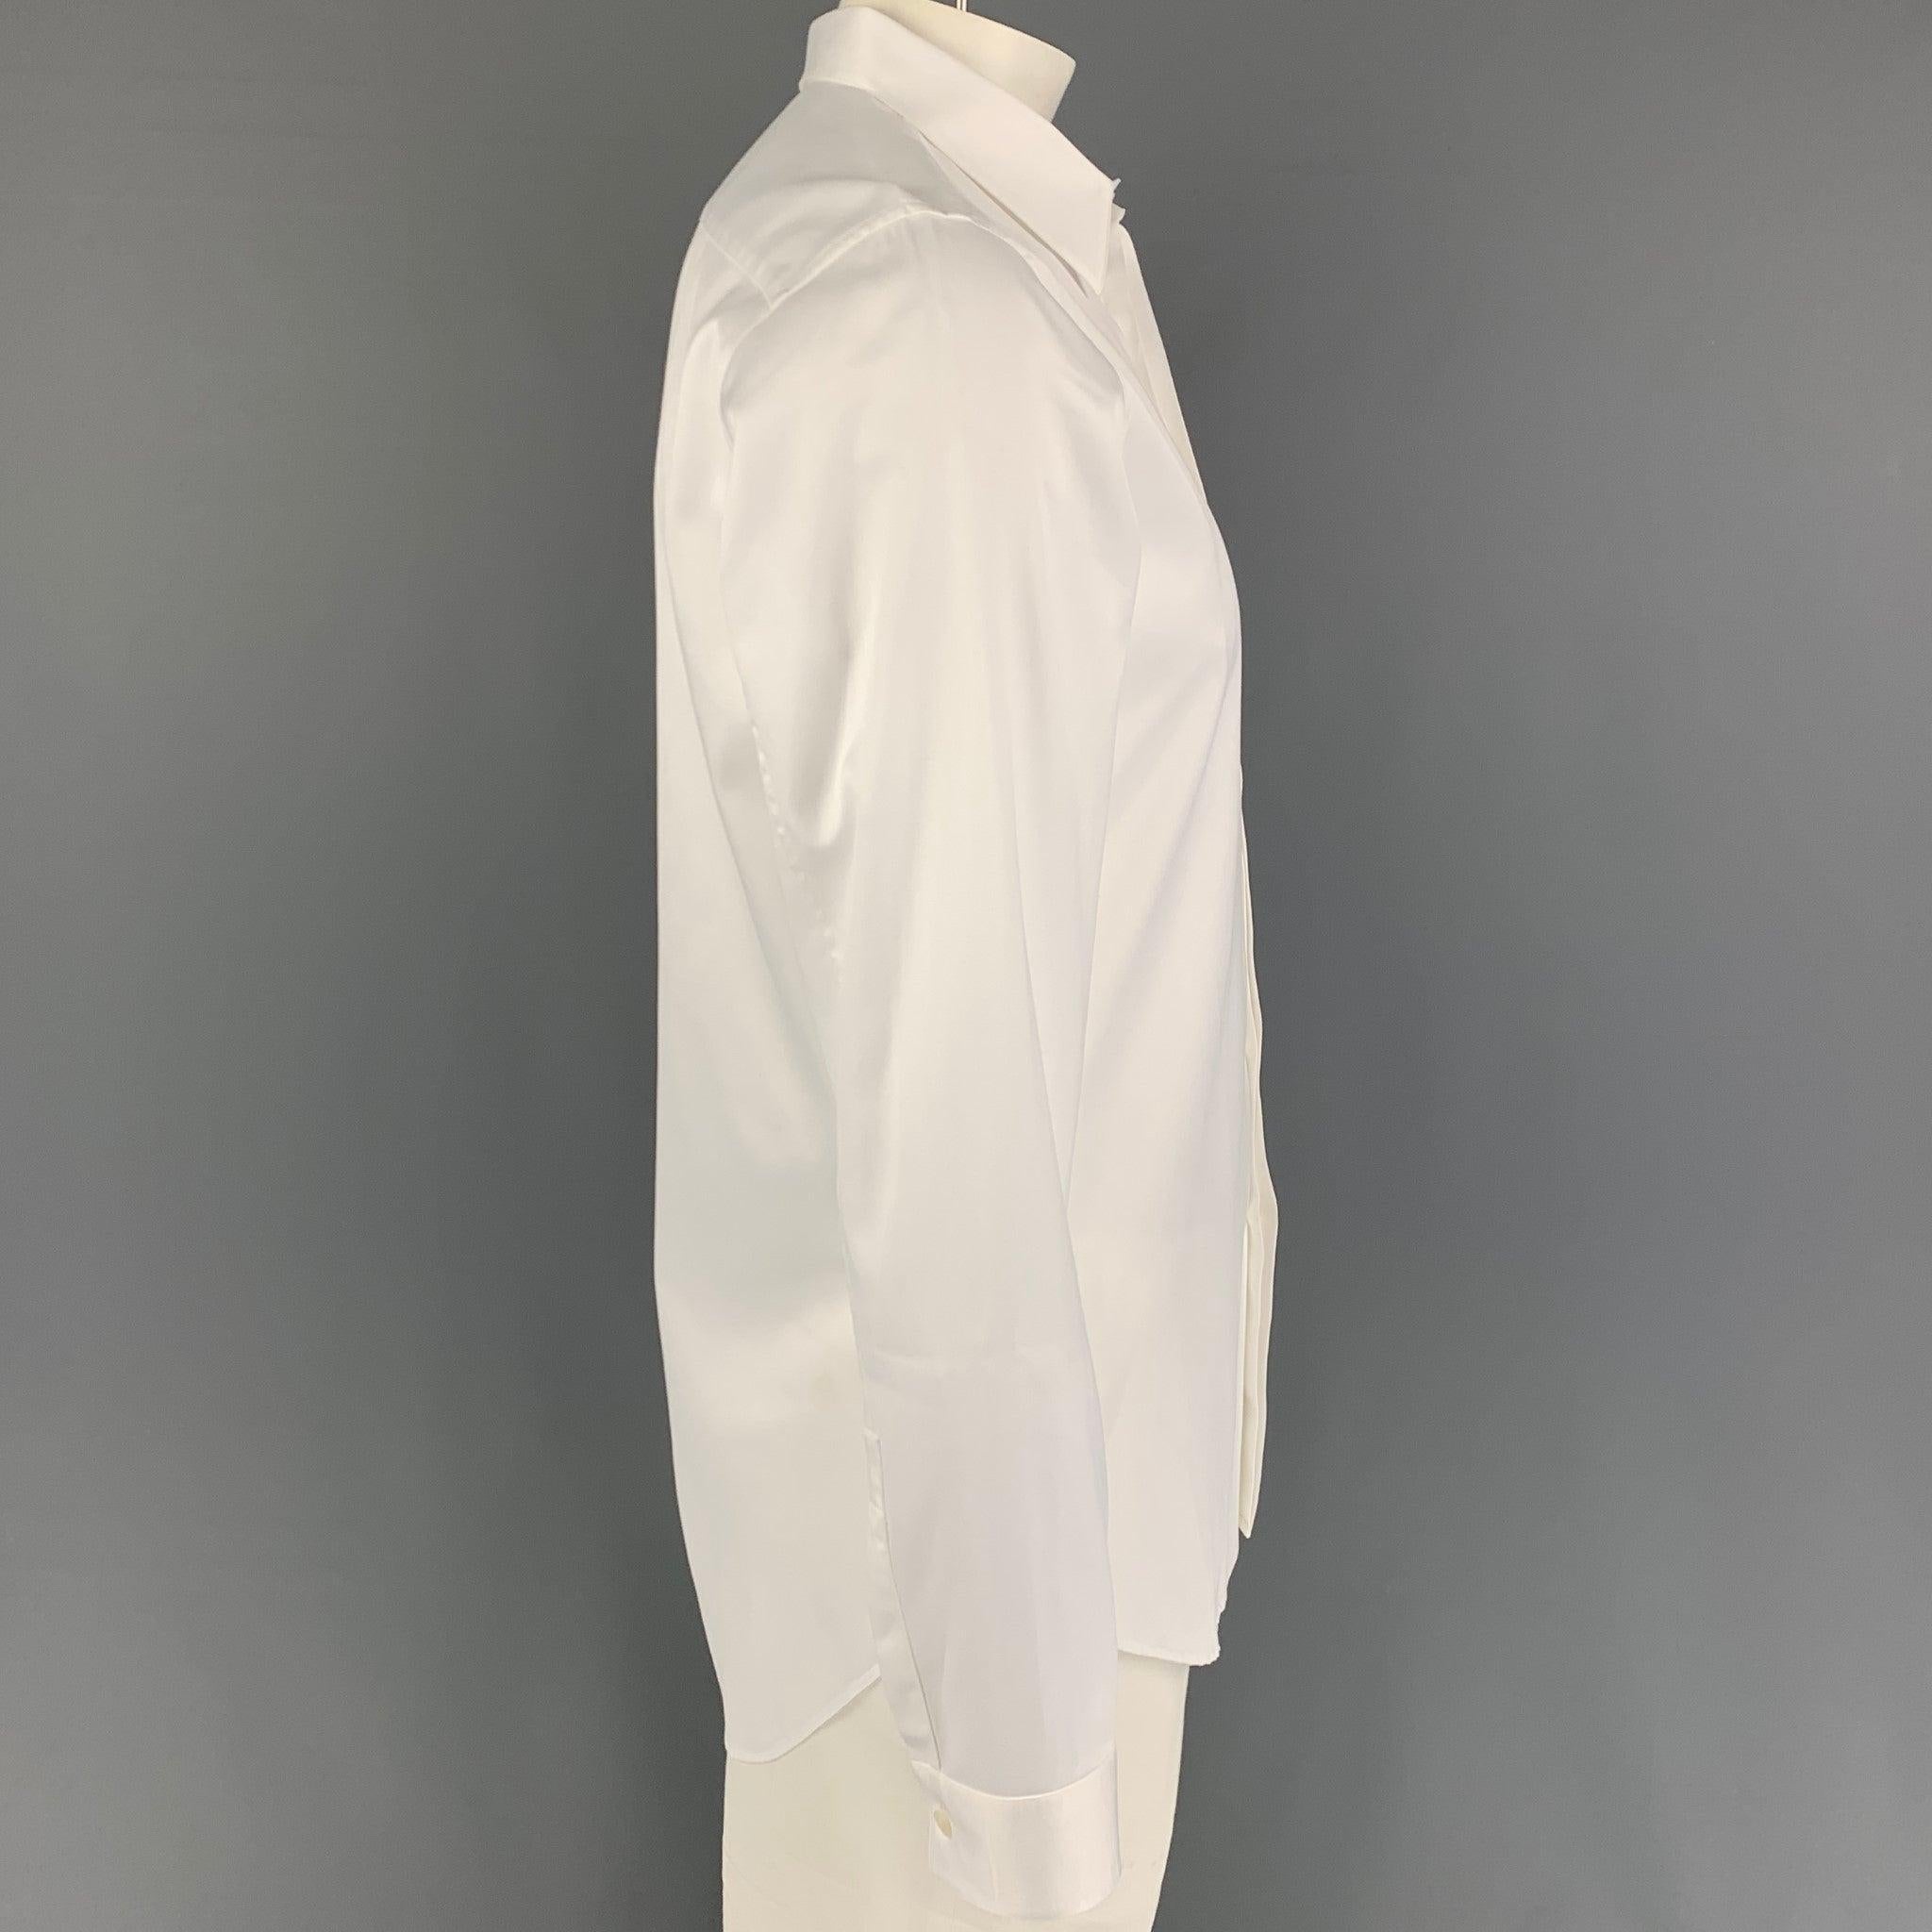 CALVIN KLEIN COLLECTION long sleeve shirt comes in a white cotton featuring a spread collar and a hidden placket closure. Made in Italy.New With Tags.
 

Marked:   XL  

Measurements: 
 
Shoulder: 18 inches  Chest: 42 inches  Sleeve: 27.5 inches 